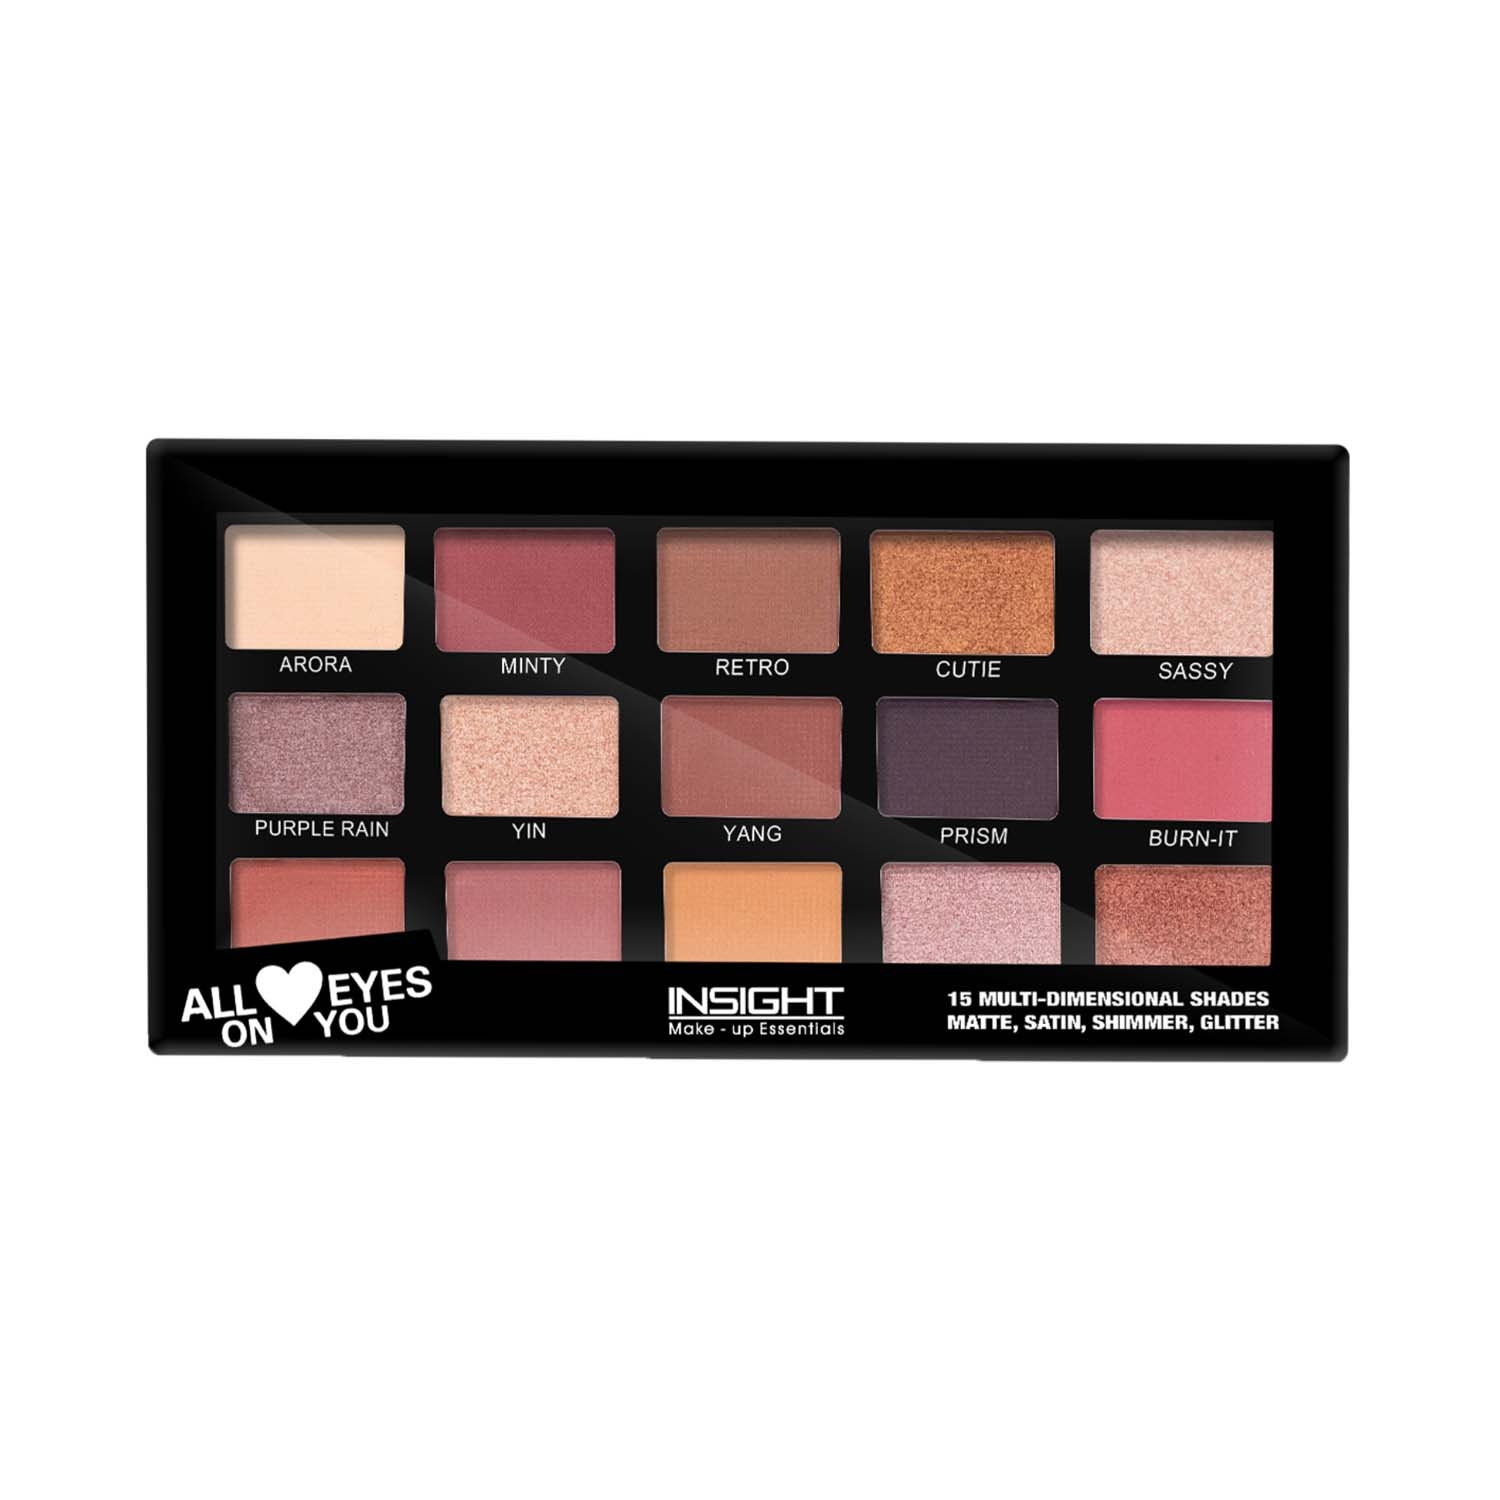 Insight Cosmetics All Eyes On You Eyeshadow Palette - Multi-Color (17g)